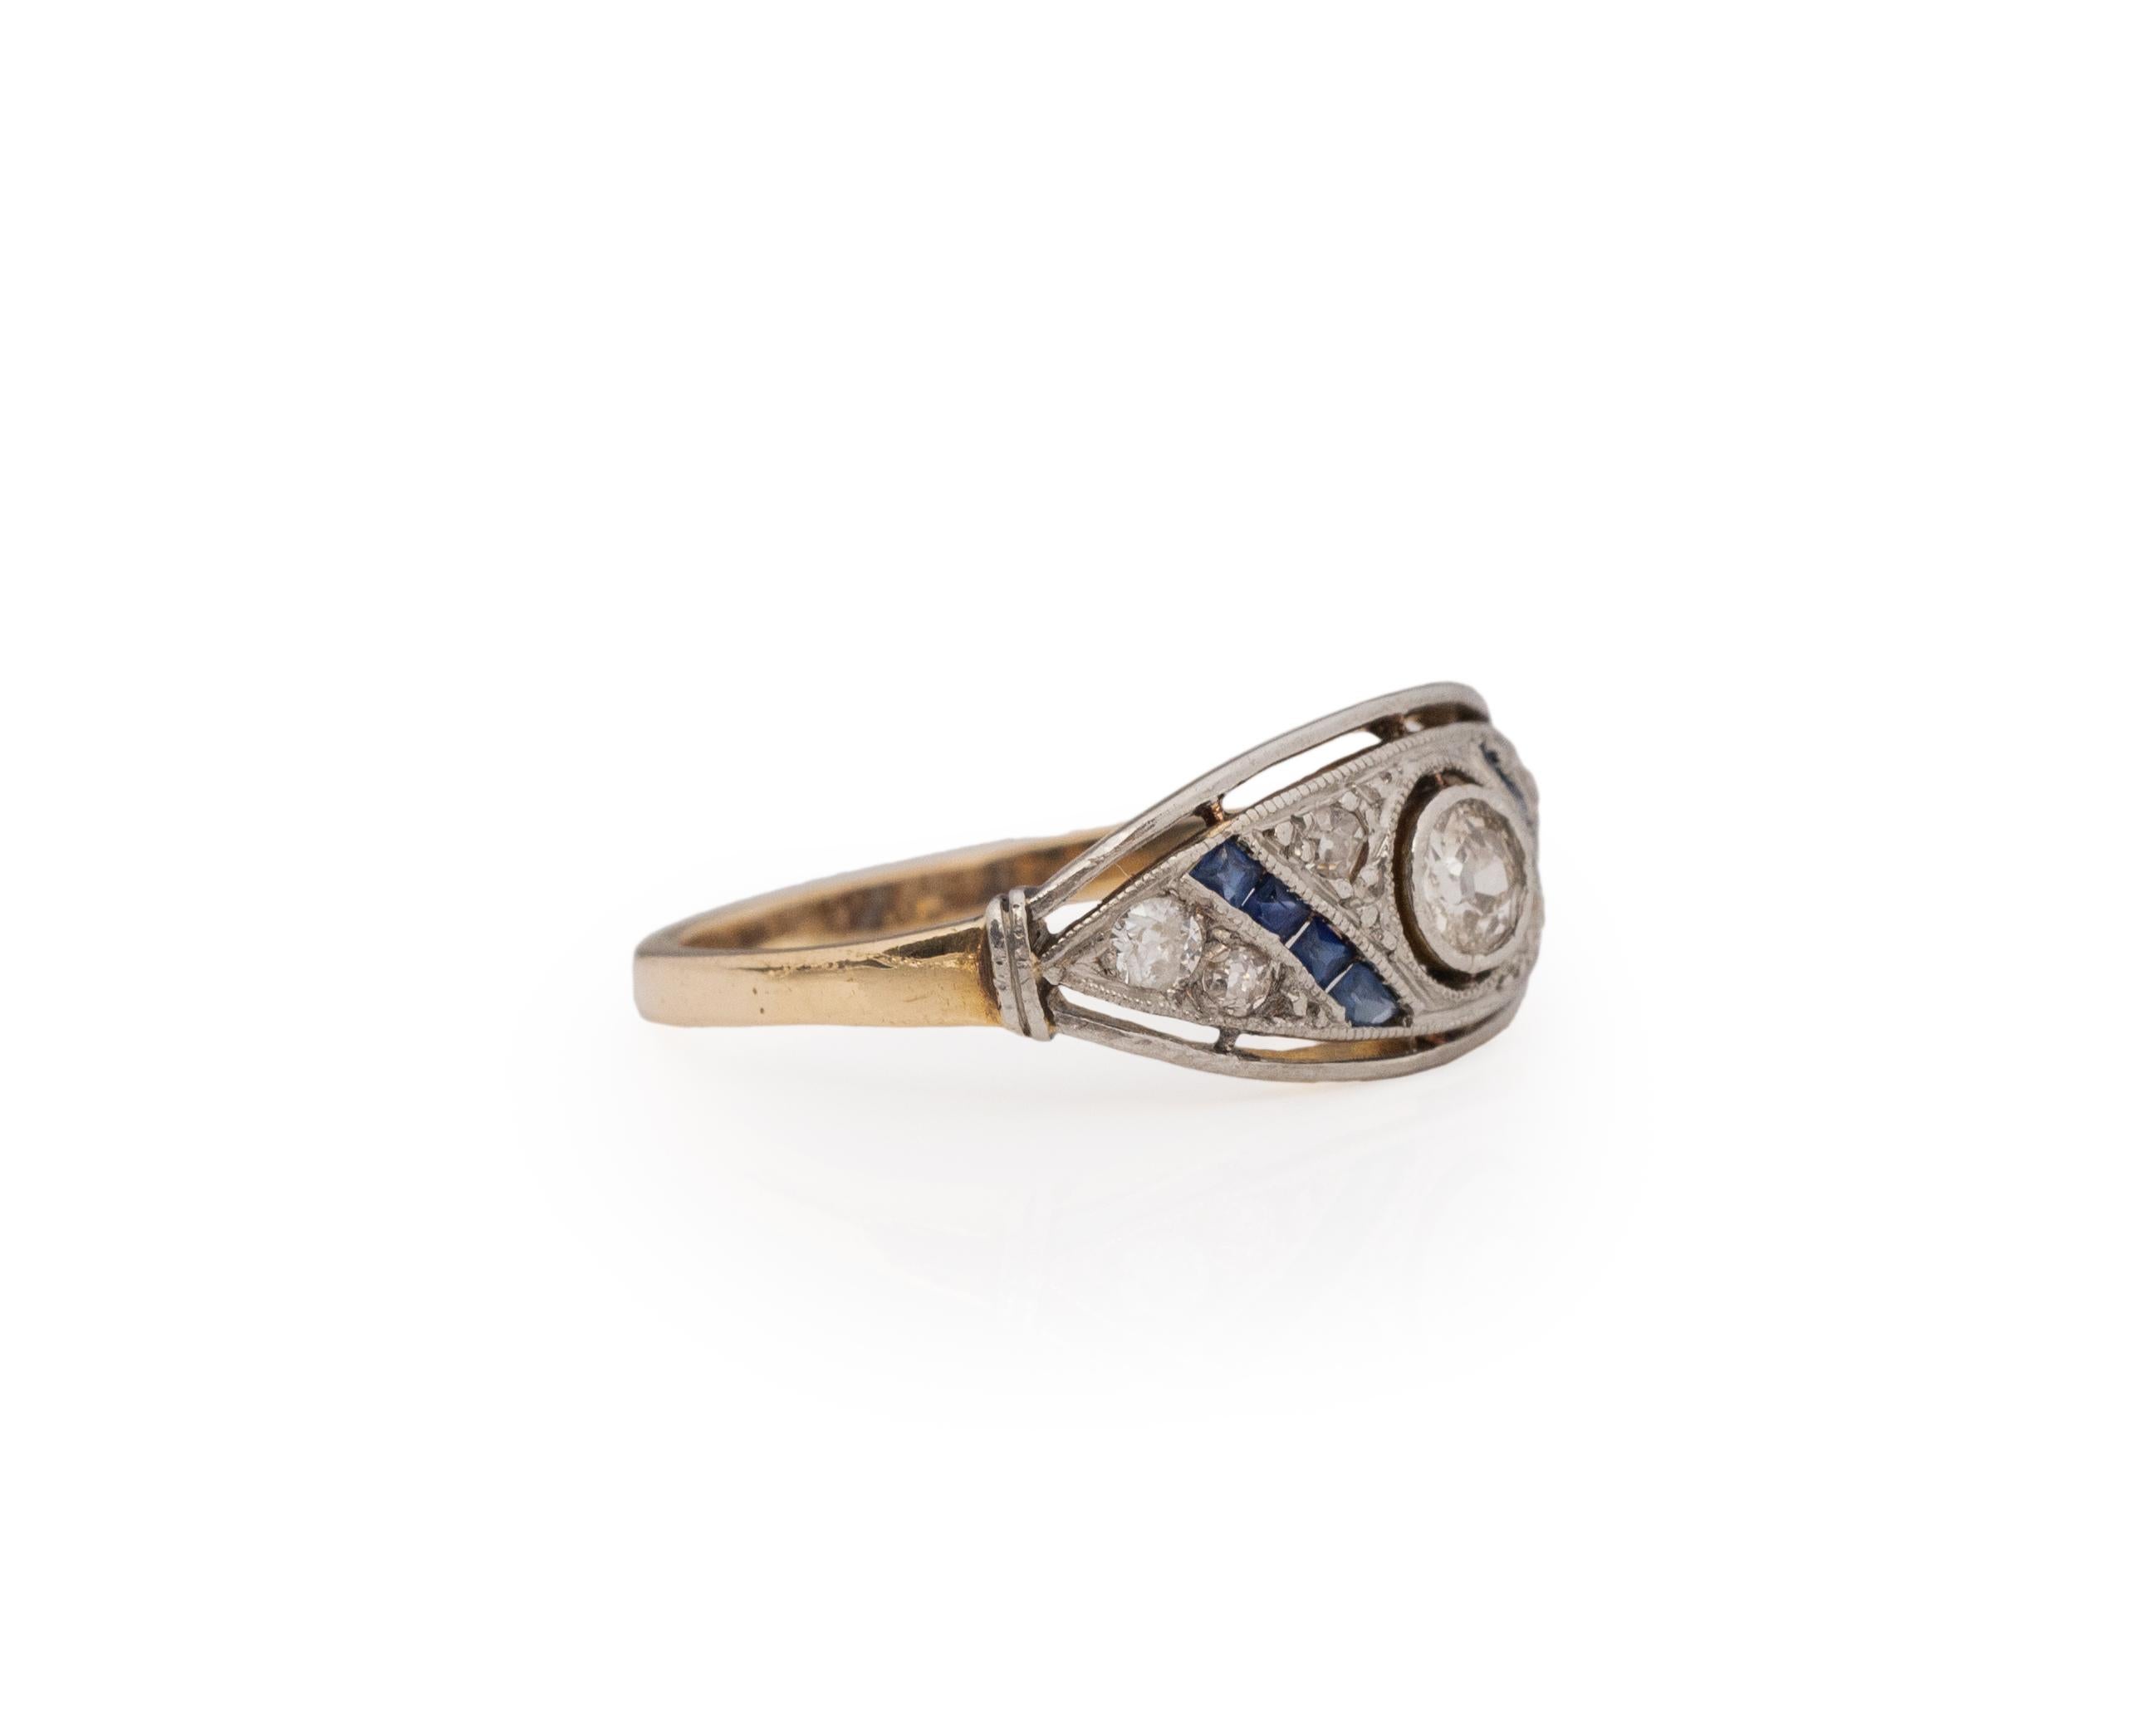 Ring Size: 7.25
Metal Type: 14K Yellow Gold [Hallmarked, and Tested]
Weight: 2.60 grams

Diamond Details:
Weight: .35ct, total weight
Cut: Old European brilliant
Color: I/J
Clarity: SI

Finger to Top of Stone Measurement: 5mm
Condition: Excellent